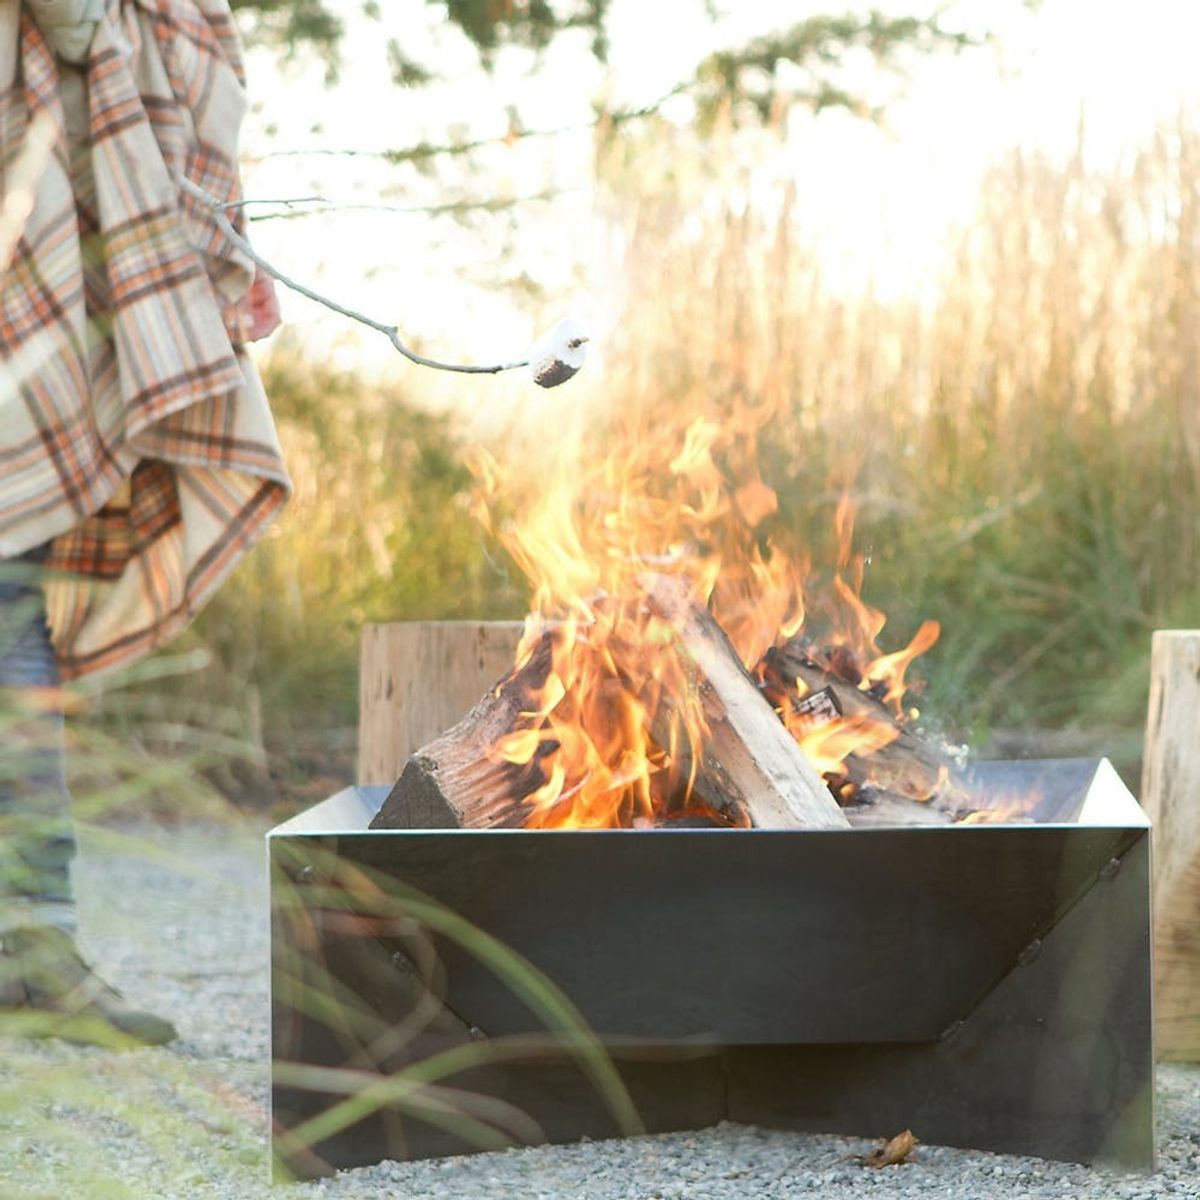 Get Stoked: We’ve Got 12 of the Hottest Fire Pits Out There